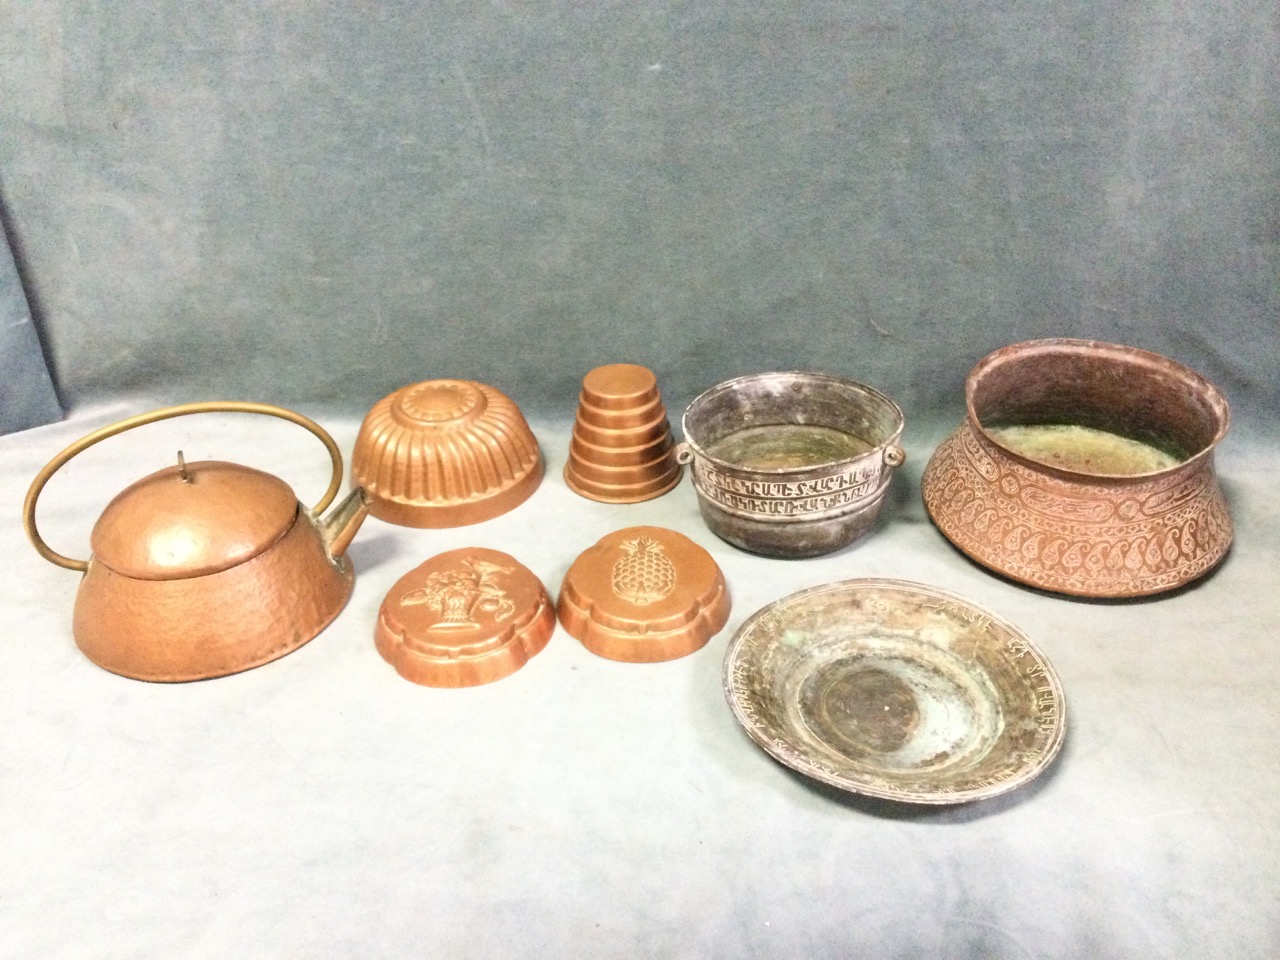 Three ancient Iranian copper vessels with Islamic decoration; four copper cooking moulds; and an